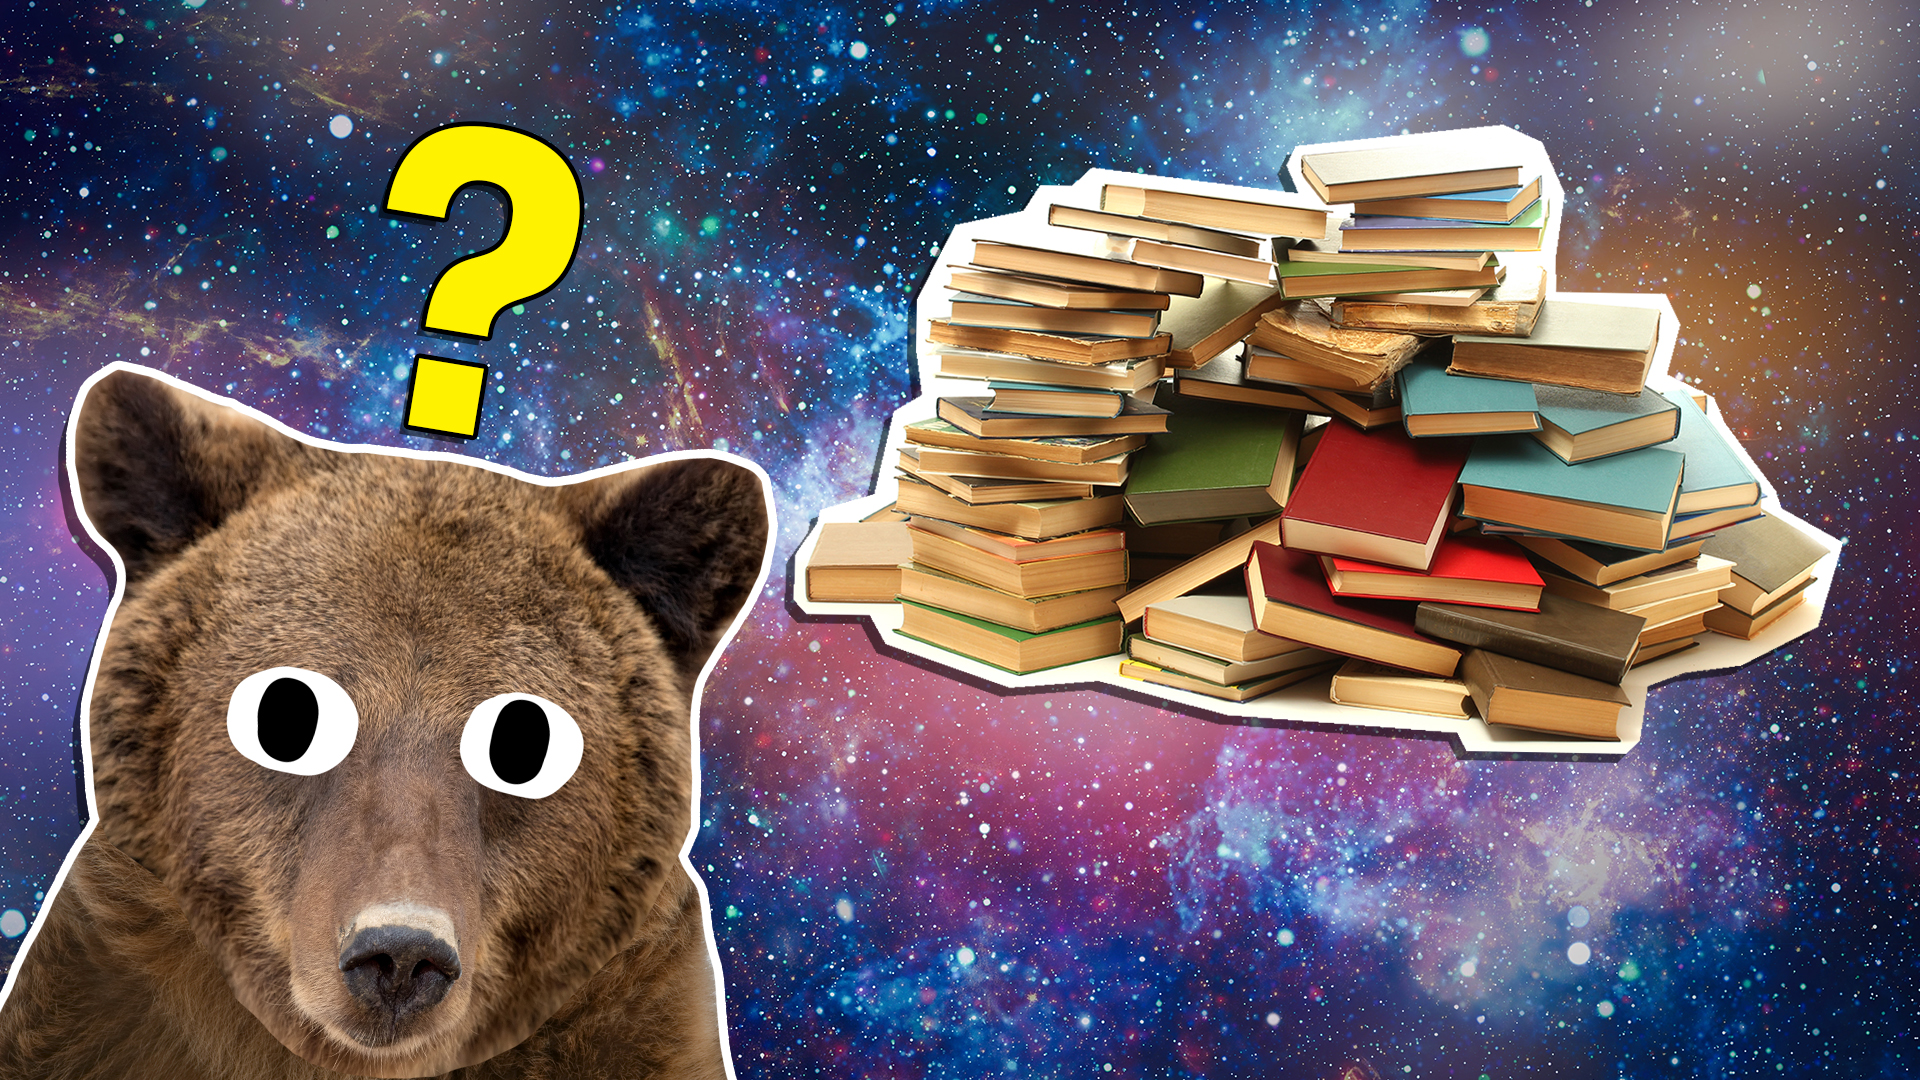 A bear and a pile of books